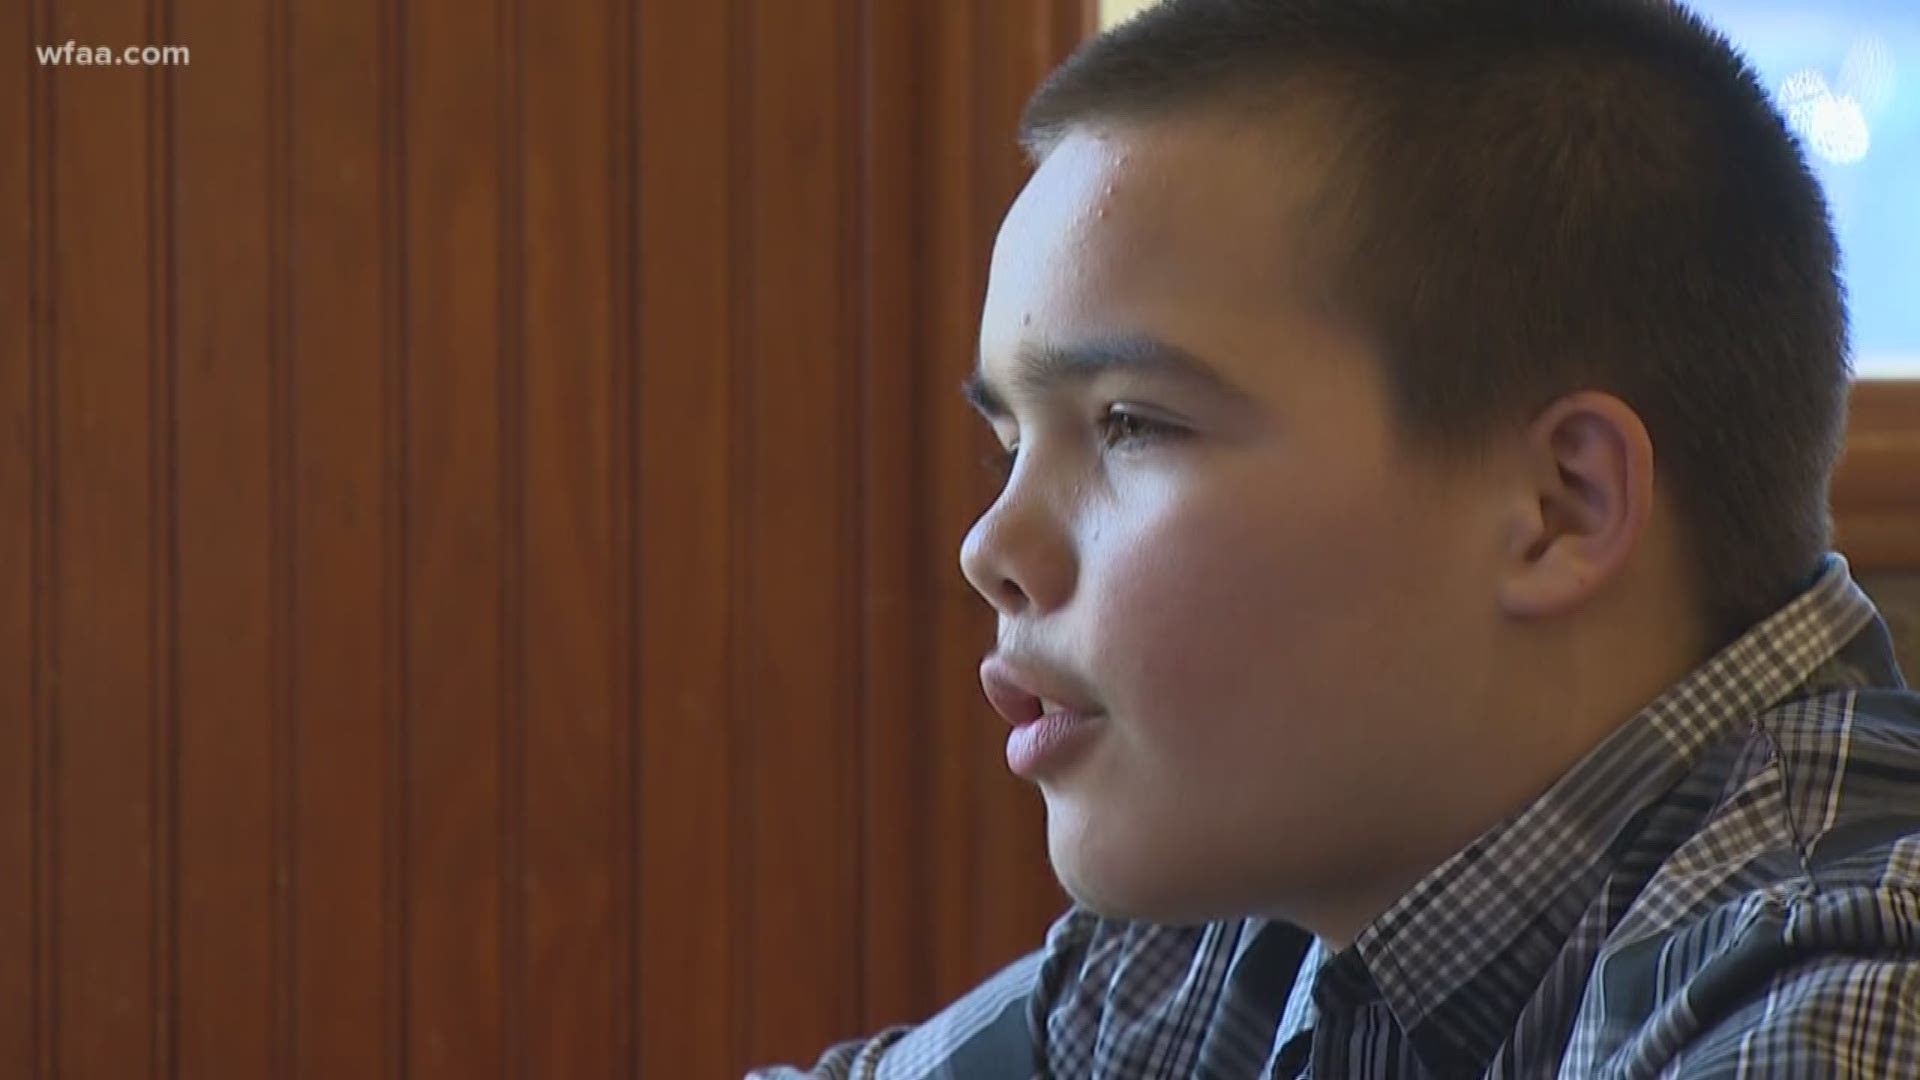 Wednesday's Child 13-year-old Jason shares sweet outlook on life 